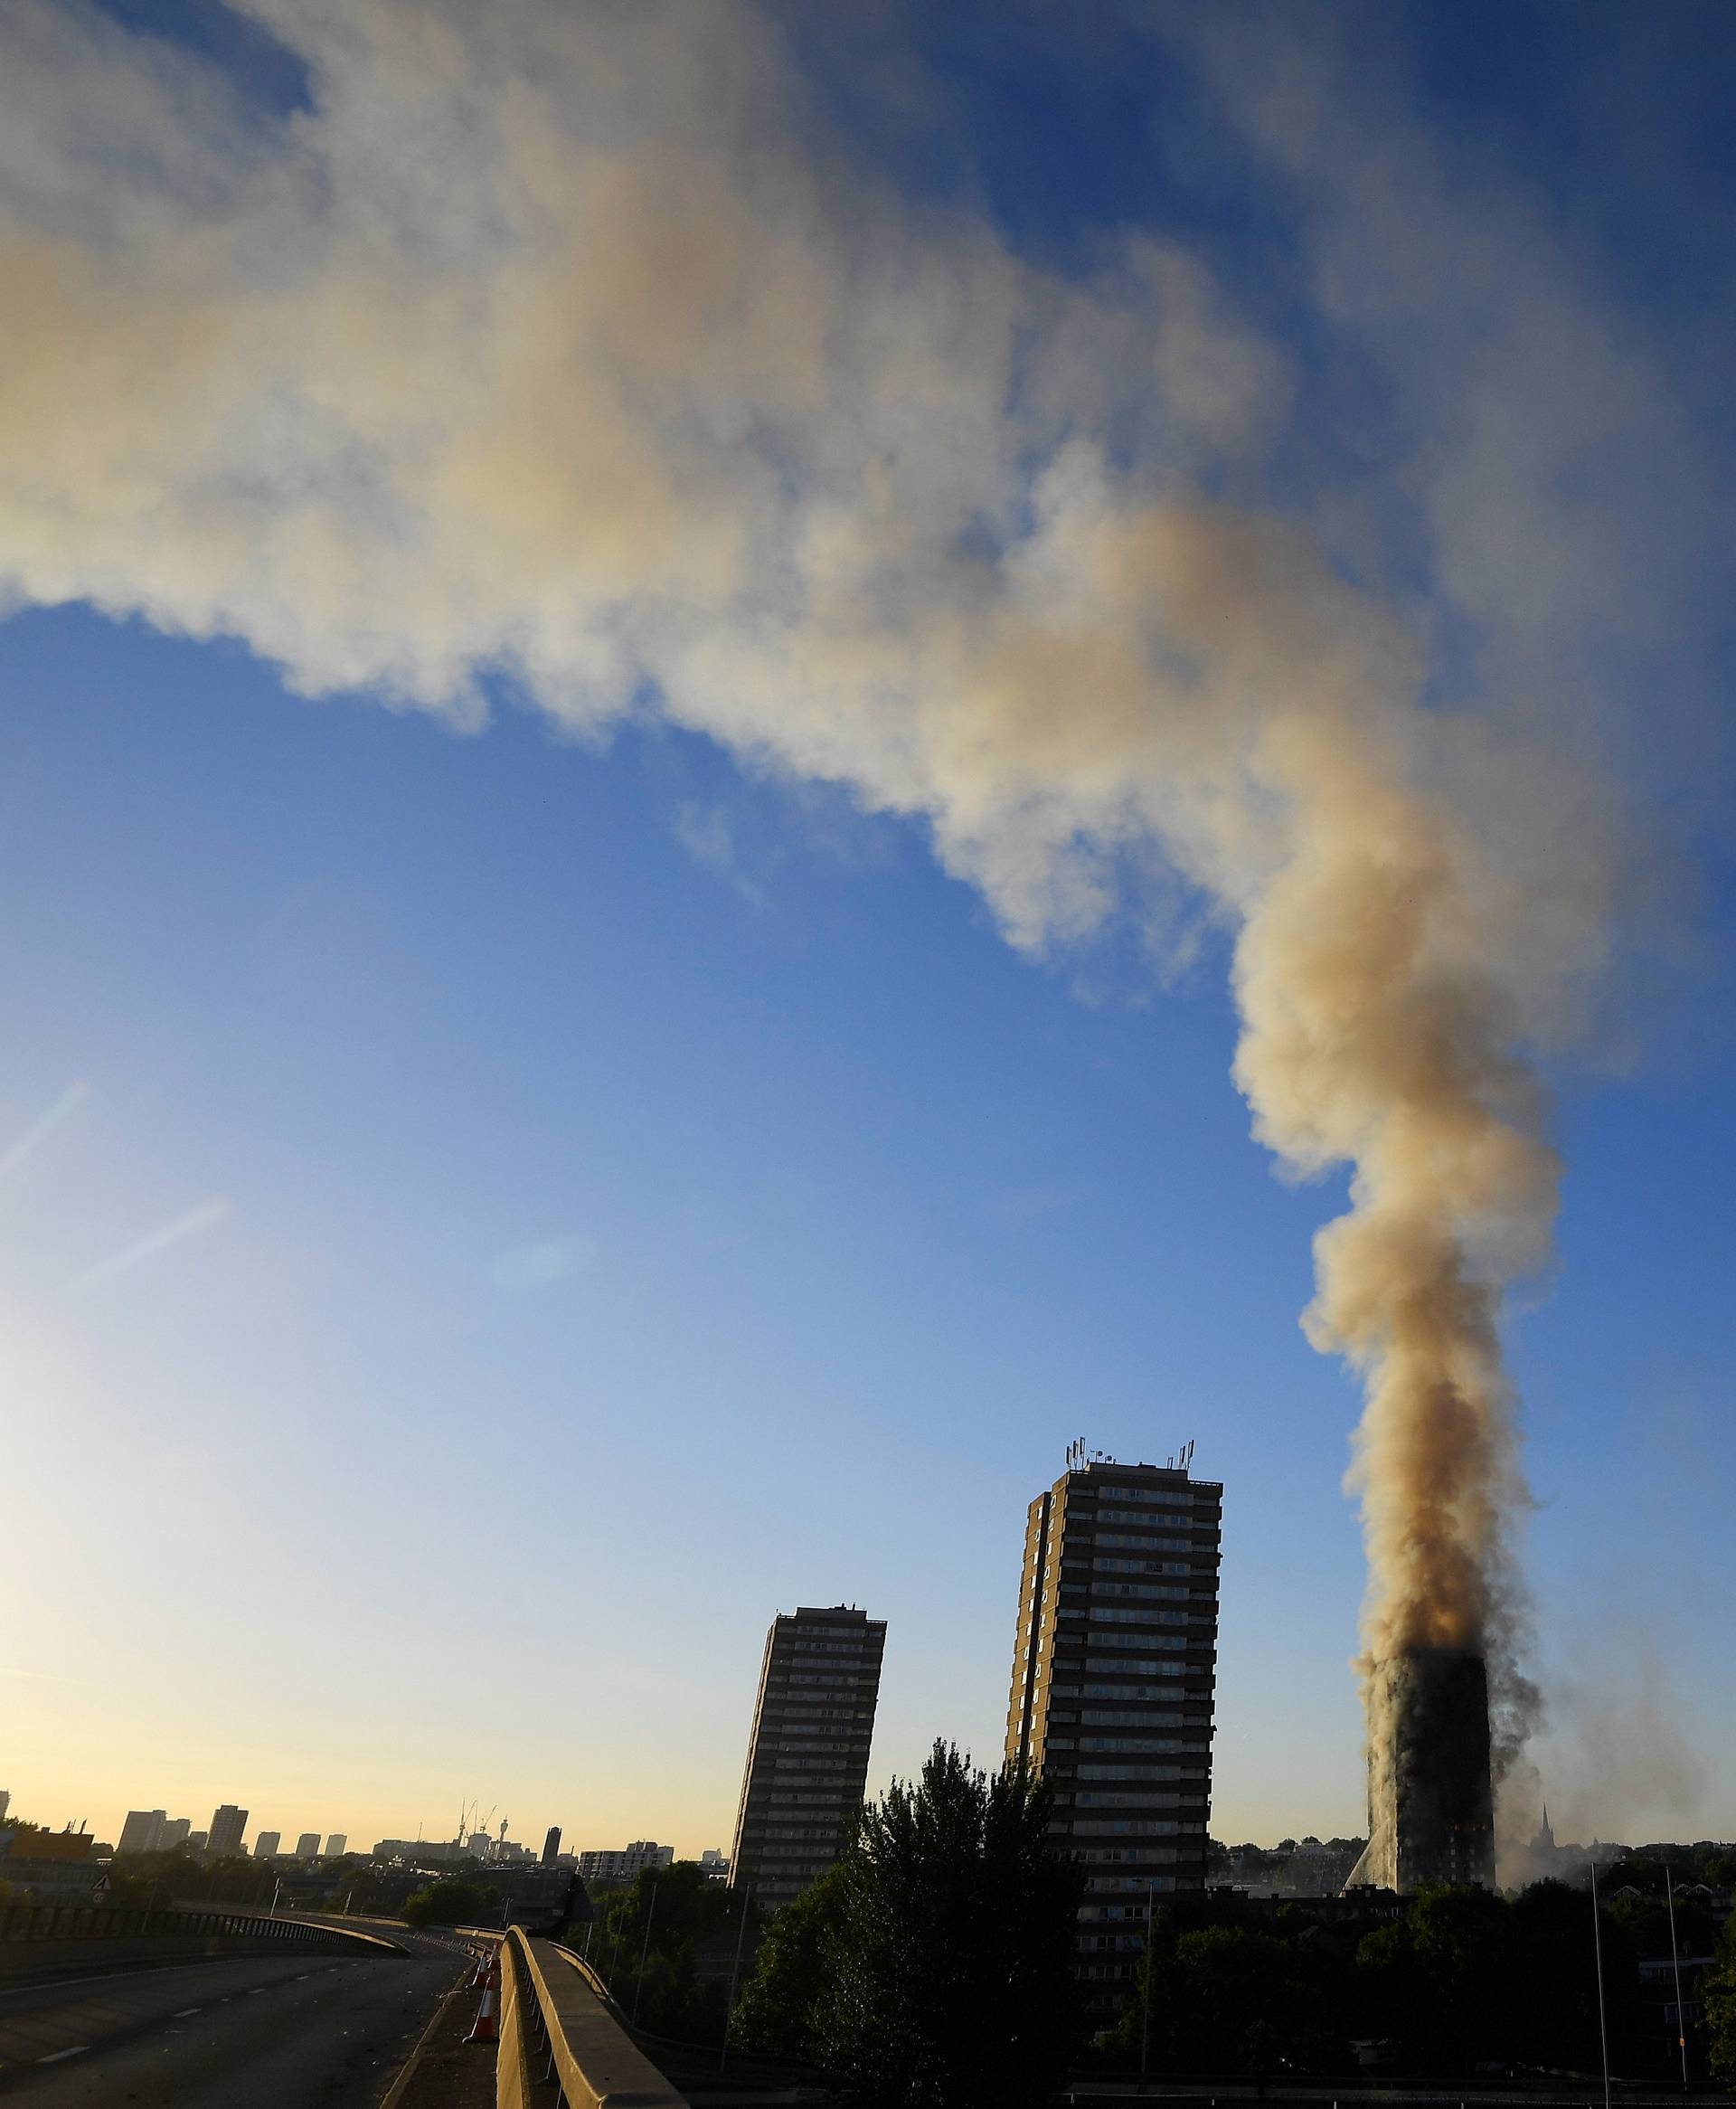 The A40 road is seen closed as flames and smoke billow as firefighters deal with a serious fire in a tower block at Latimer Road in West London